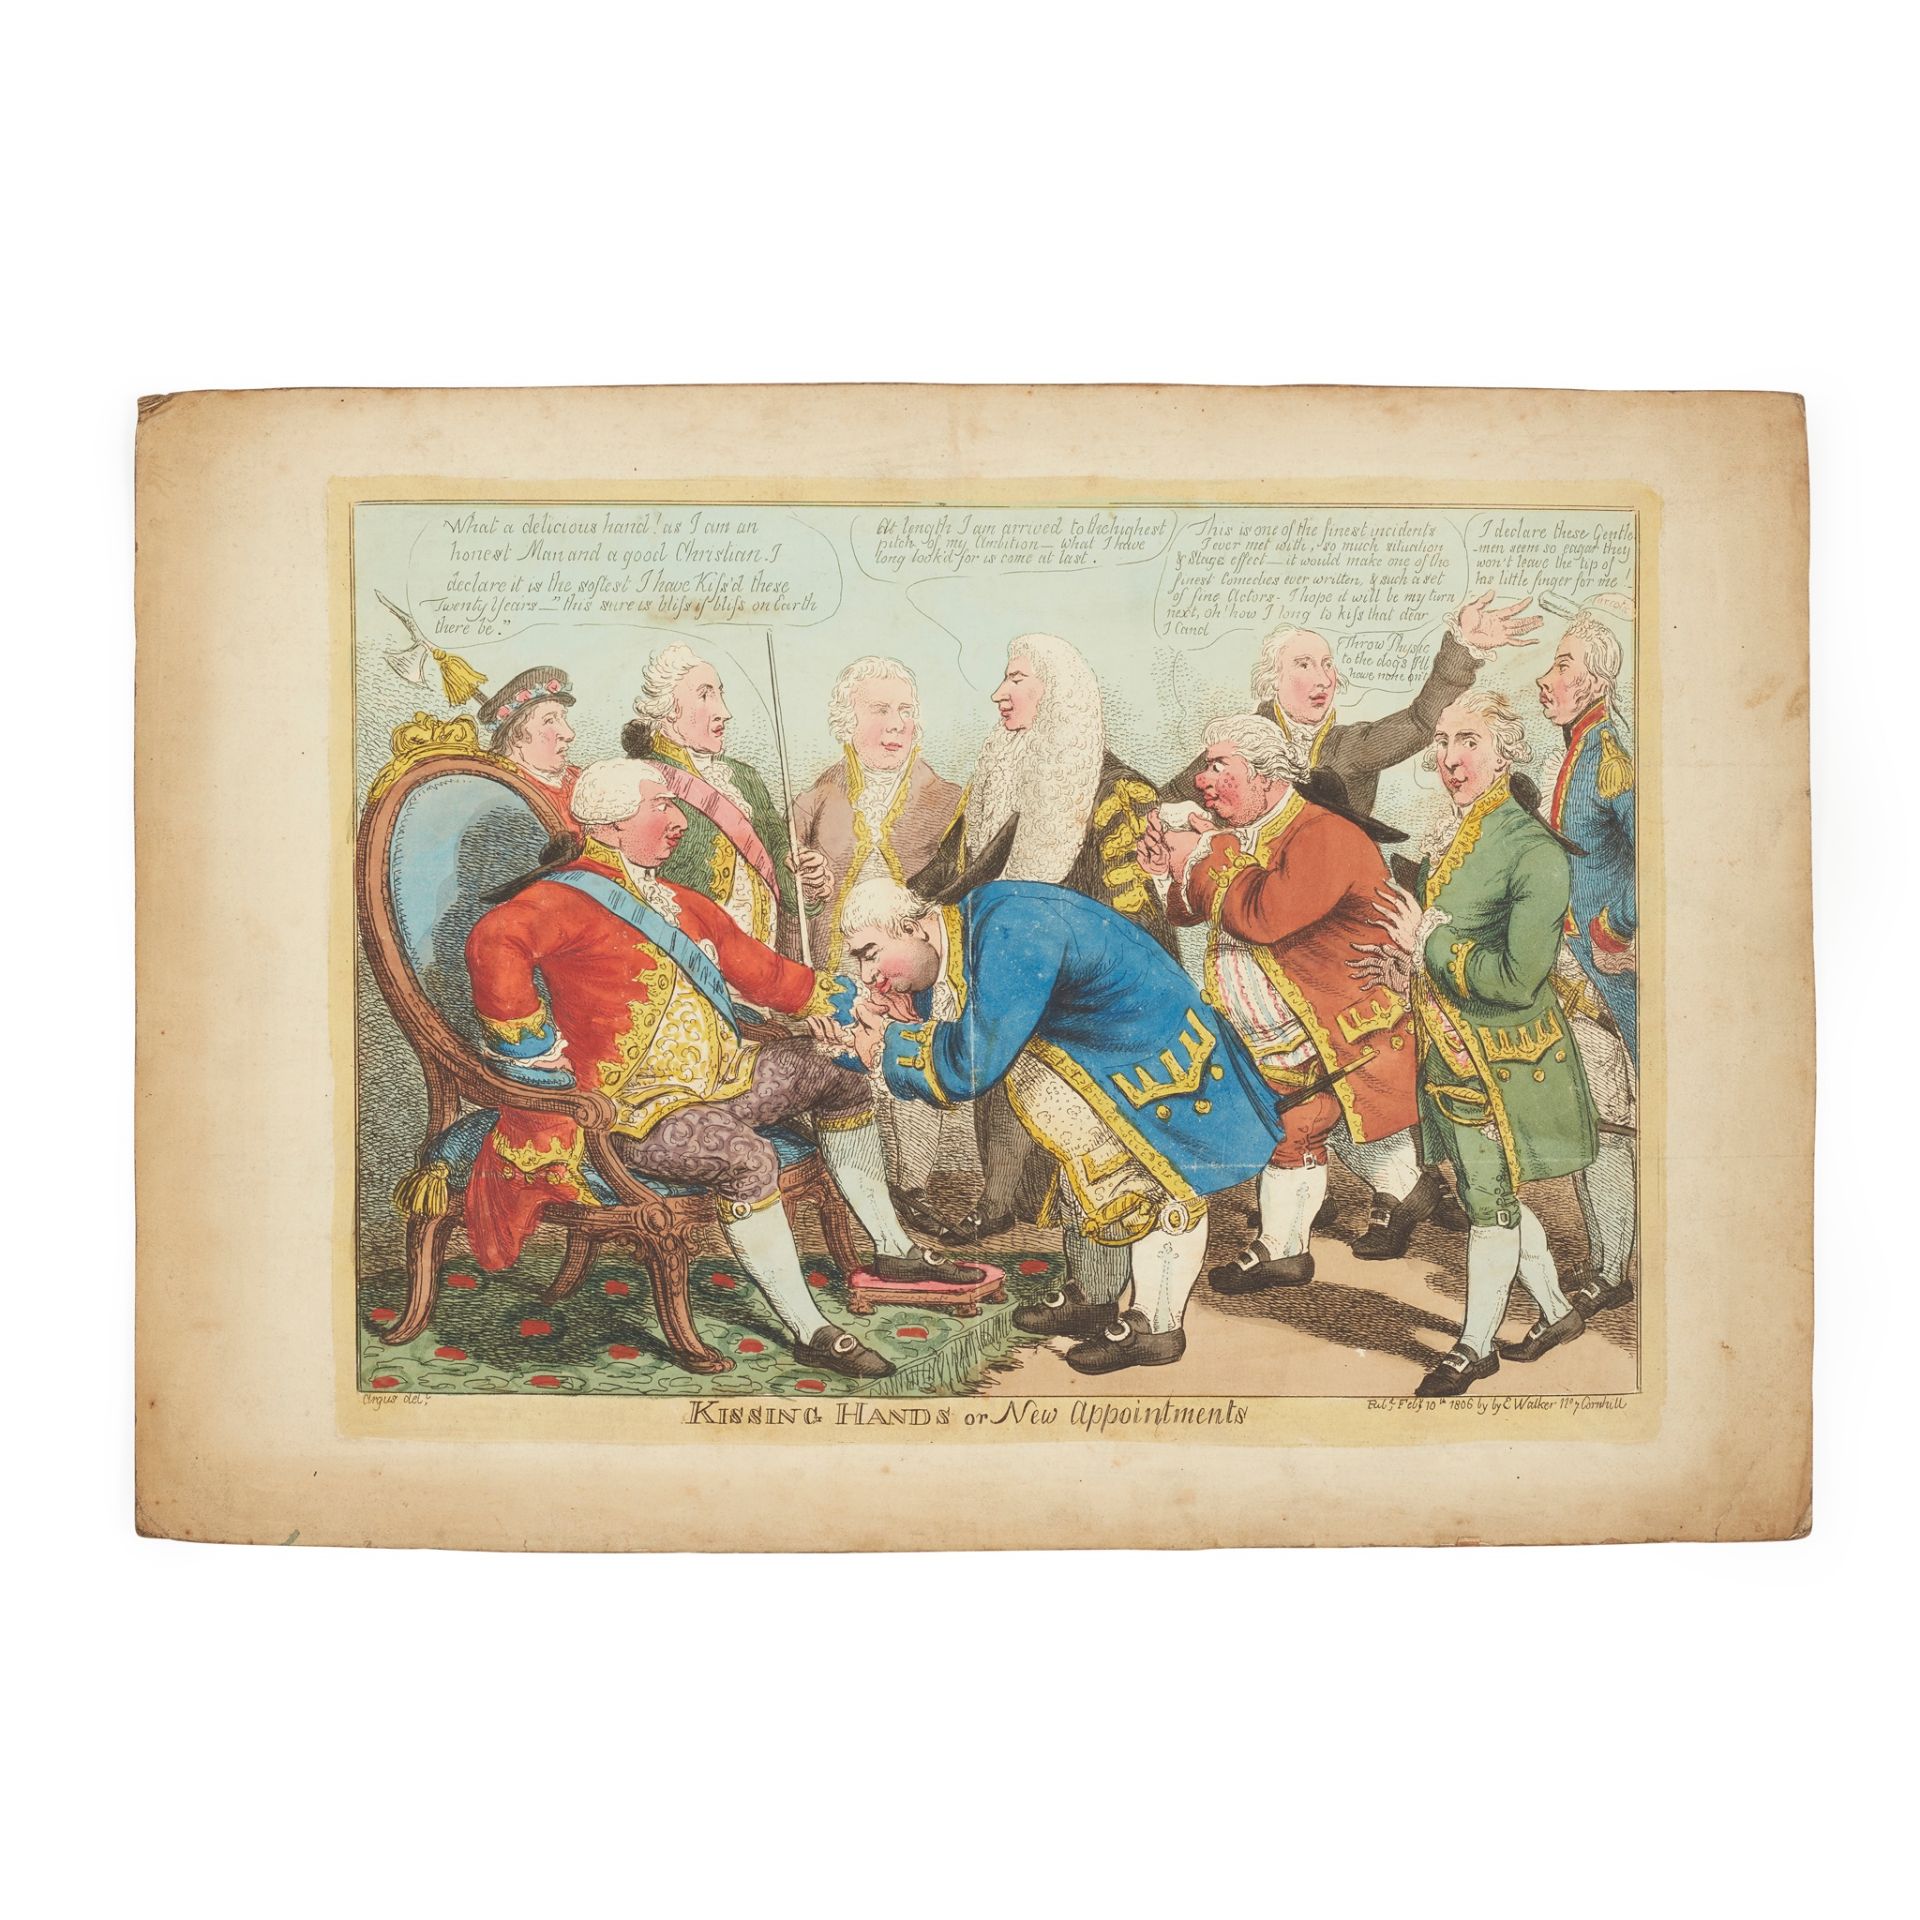 COLLECTION OF SATIRICAL ENGRAVINGS, JAMES GILLRAY AND OTHERS EARLY 19TH CENTURY - Image 13 of 14